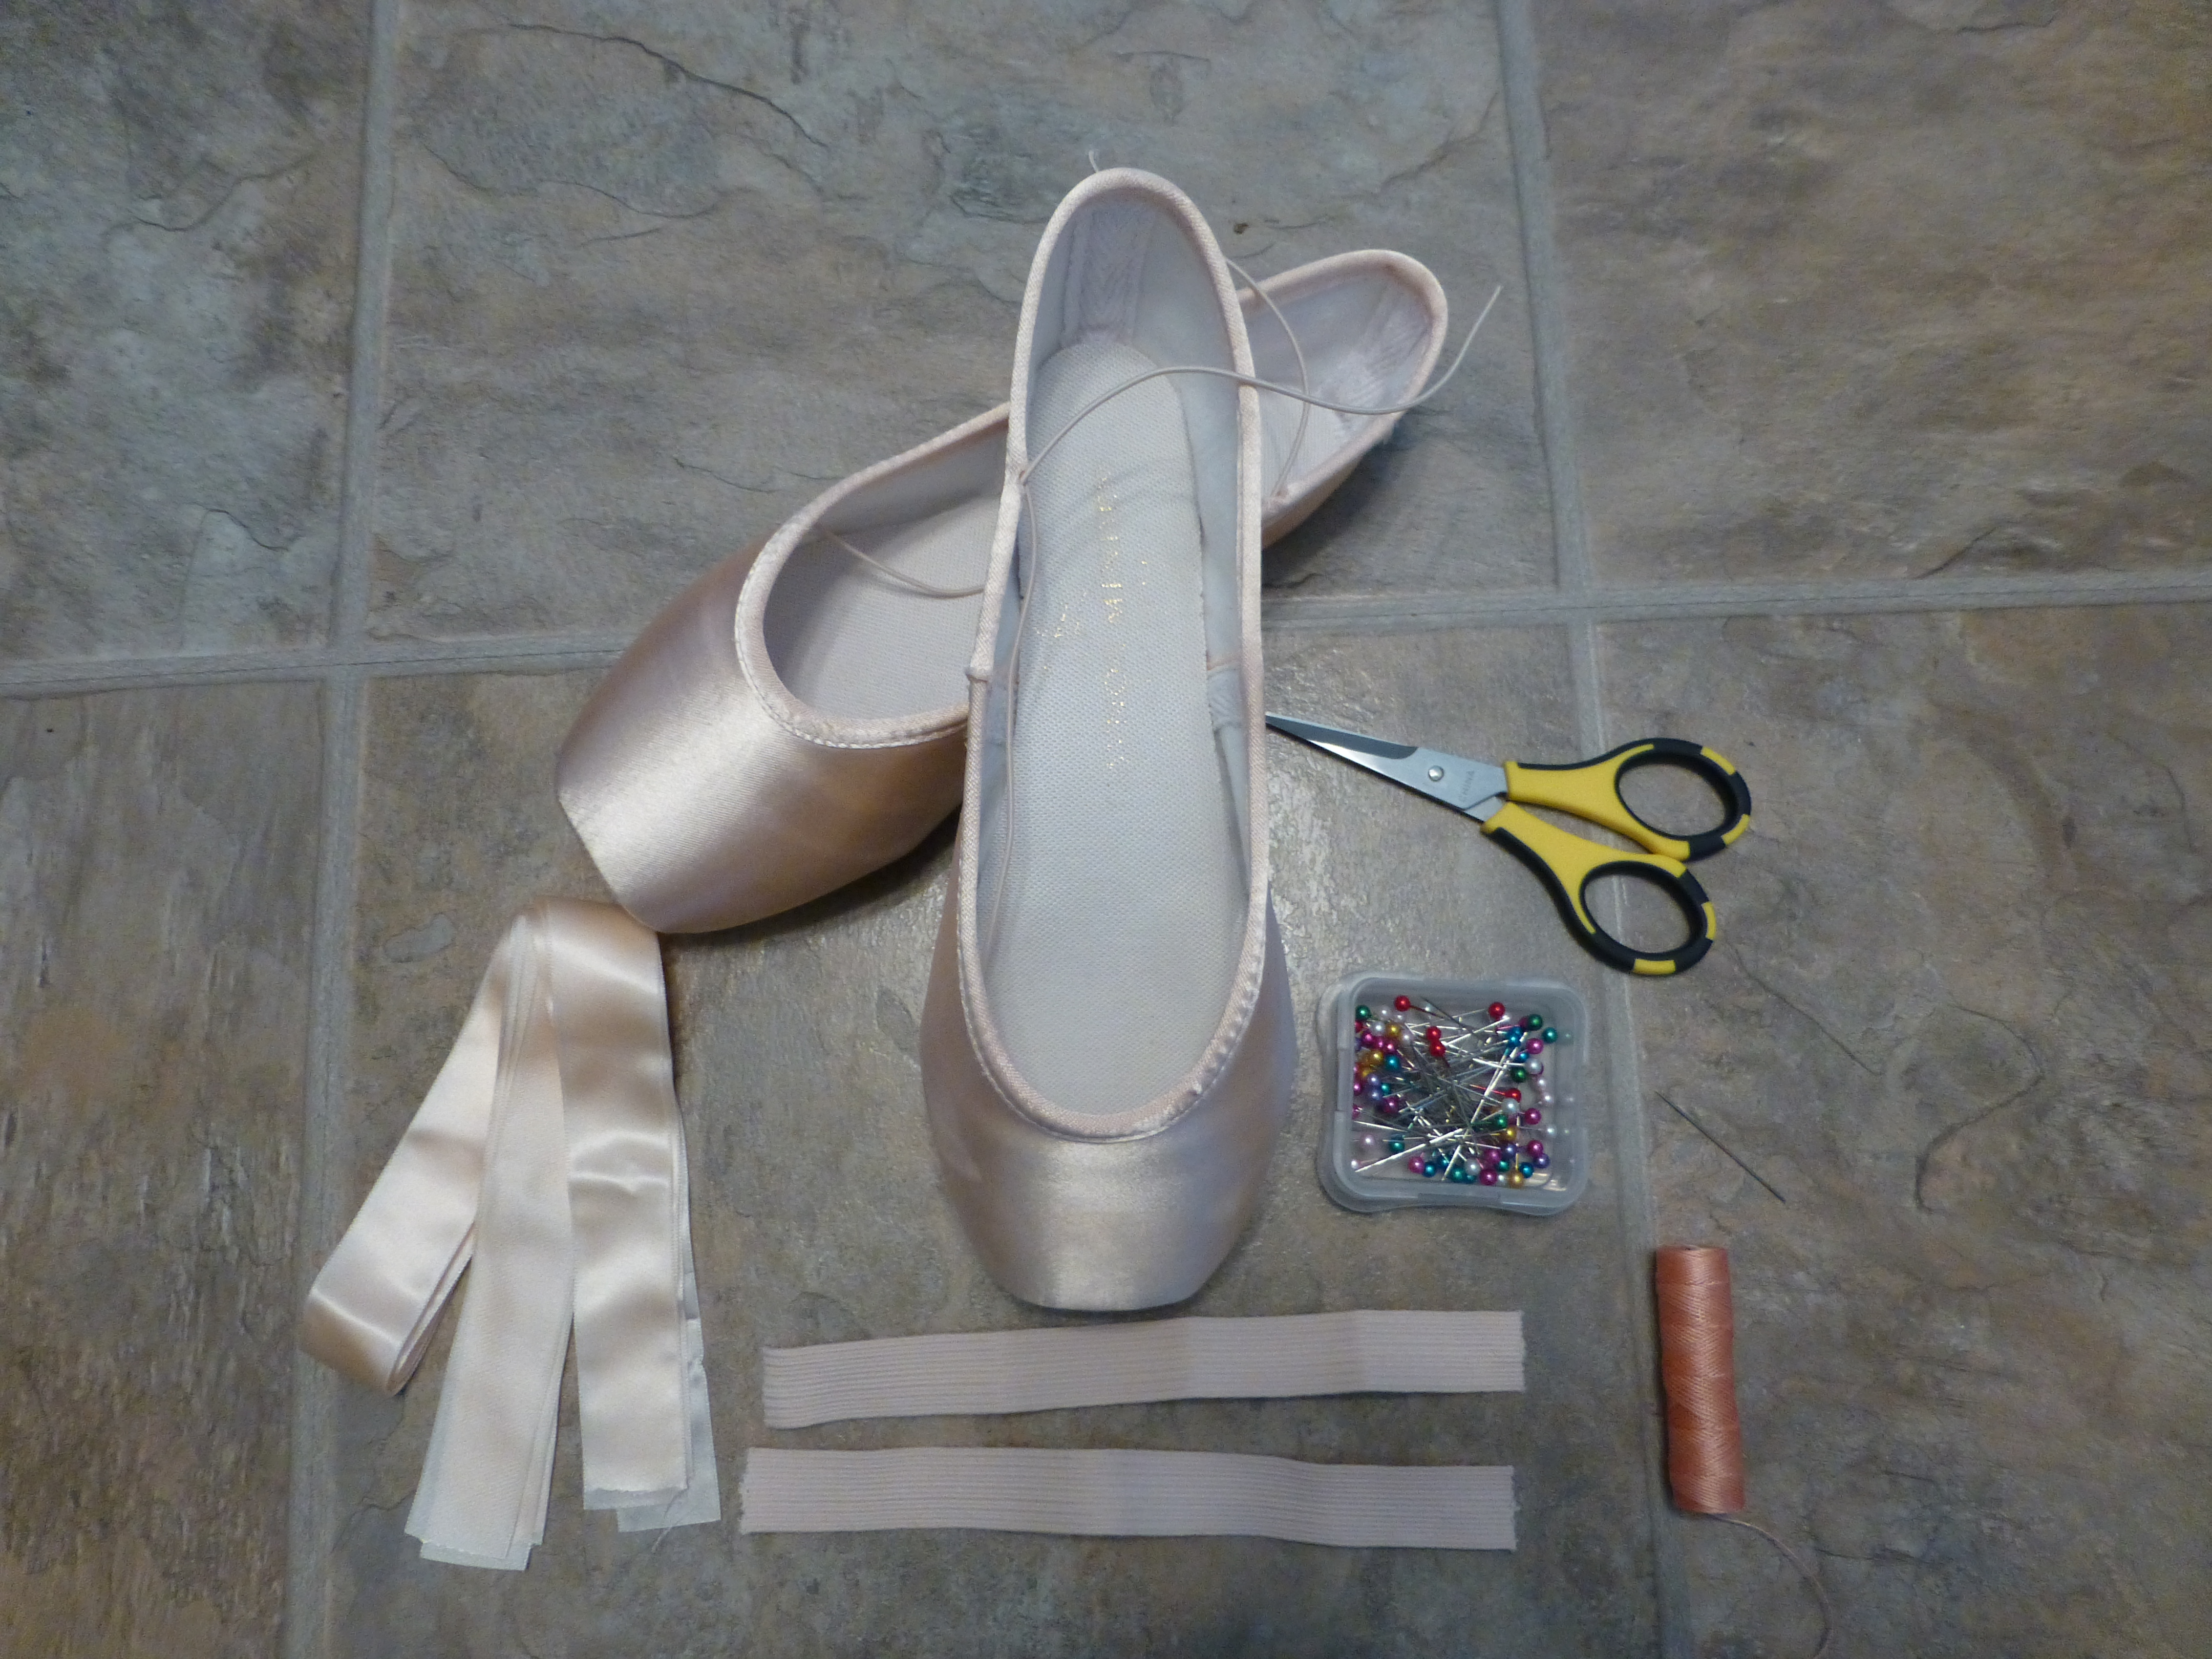 What you need to sew pointe shoes